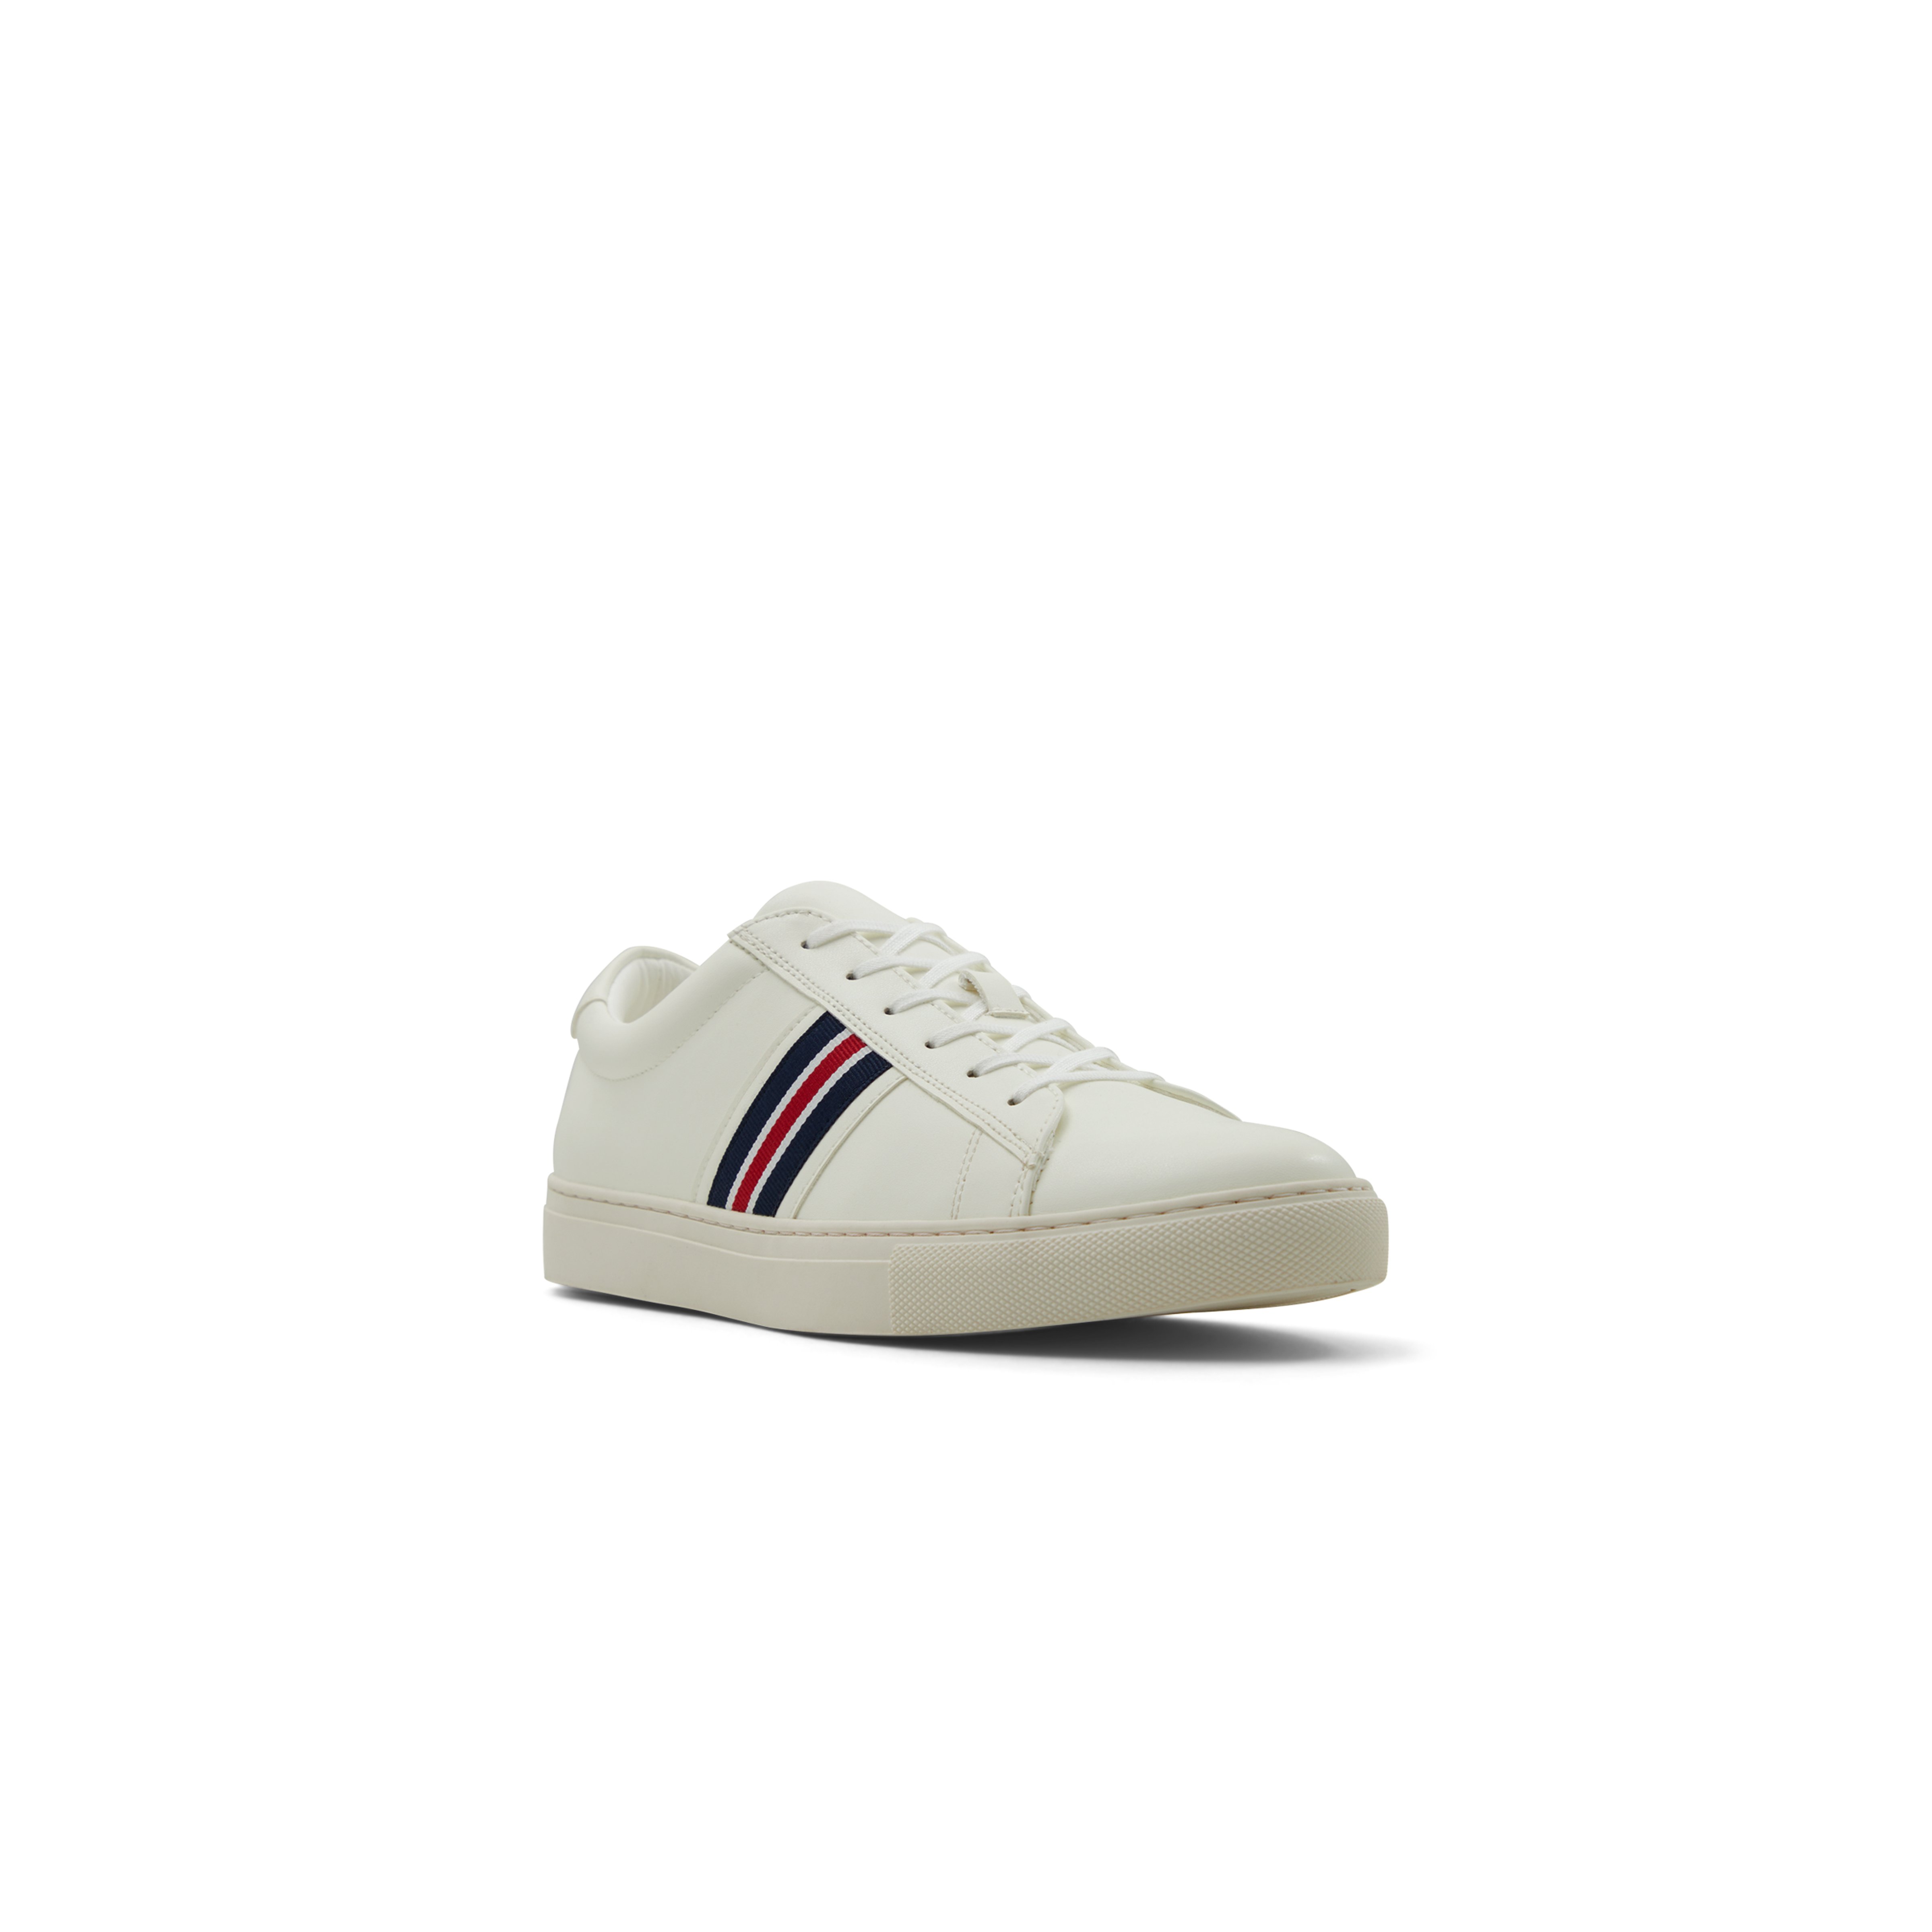 Pryce Men's White Sneakers image number 4